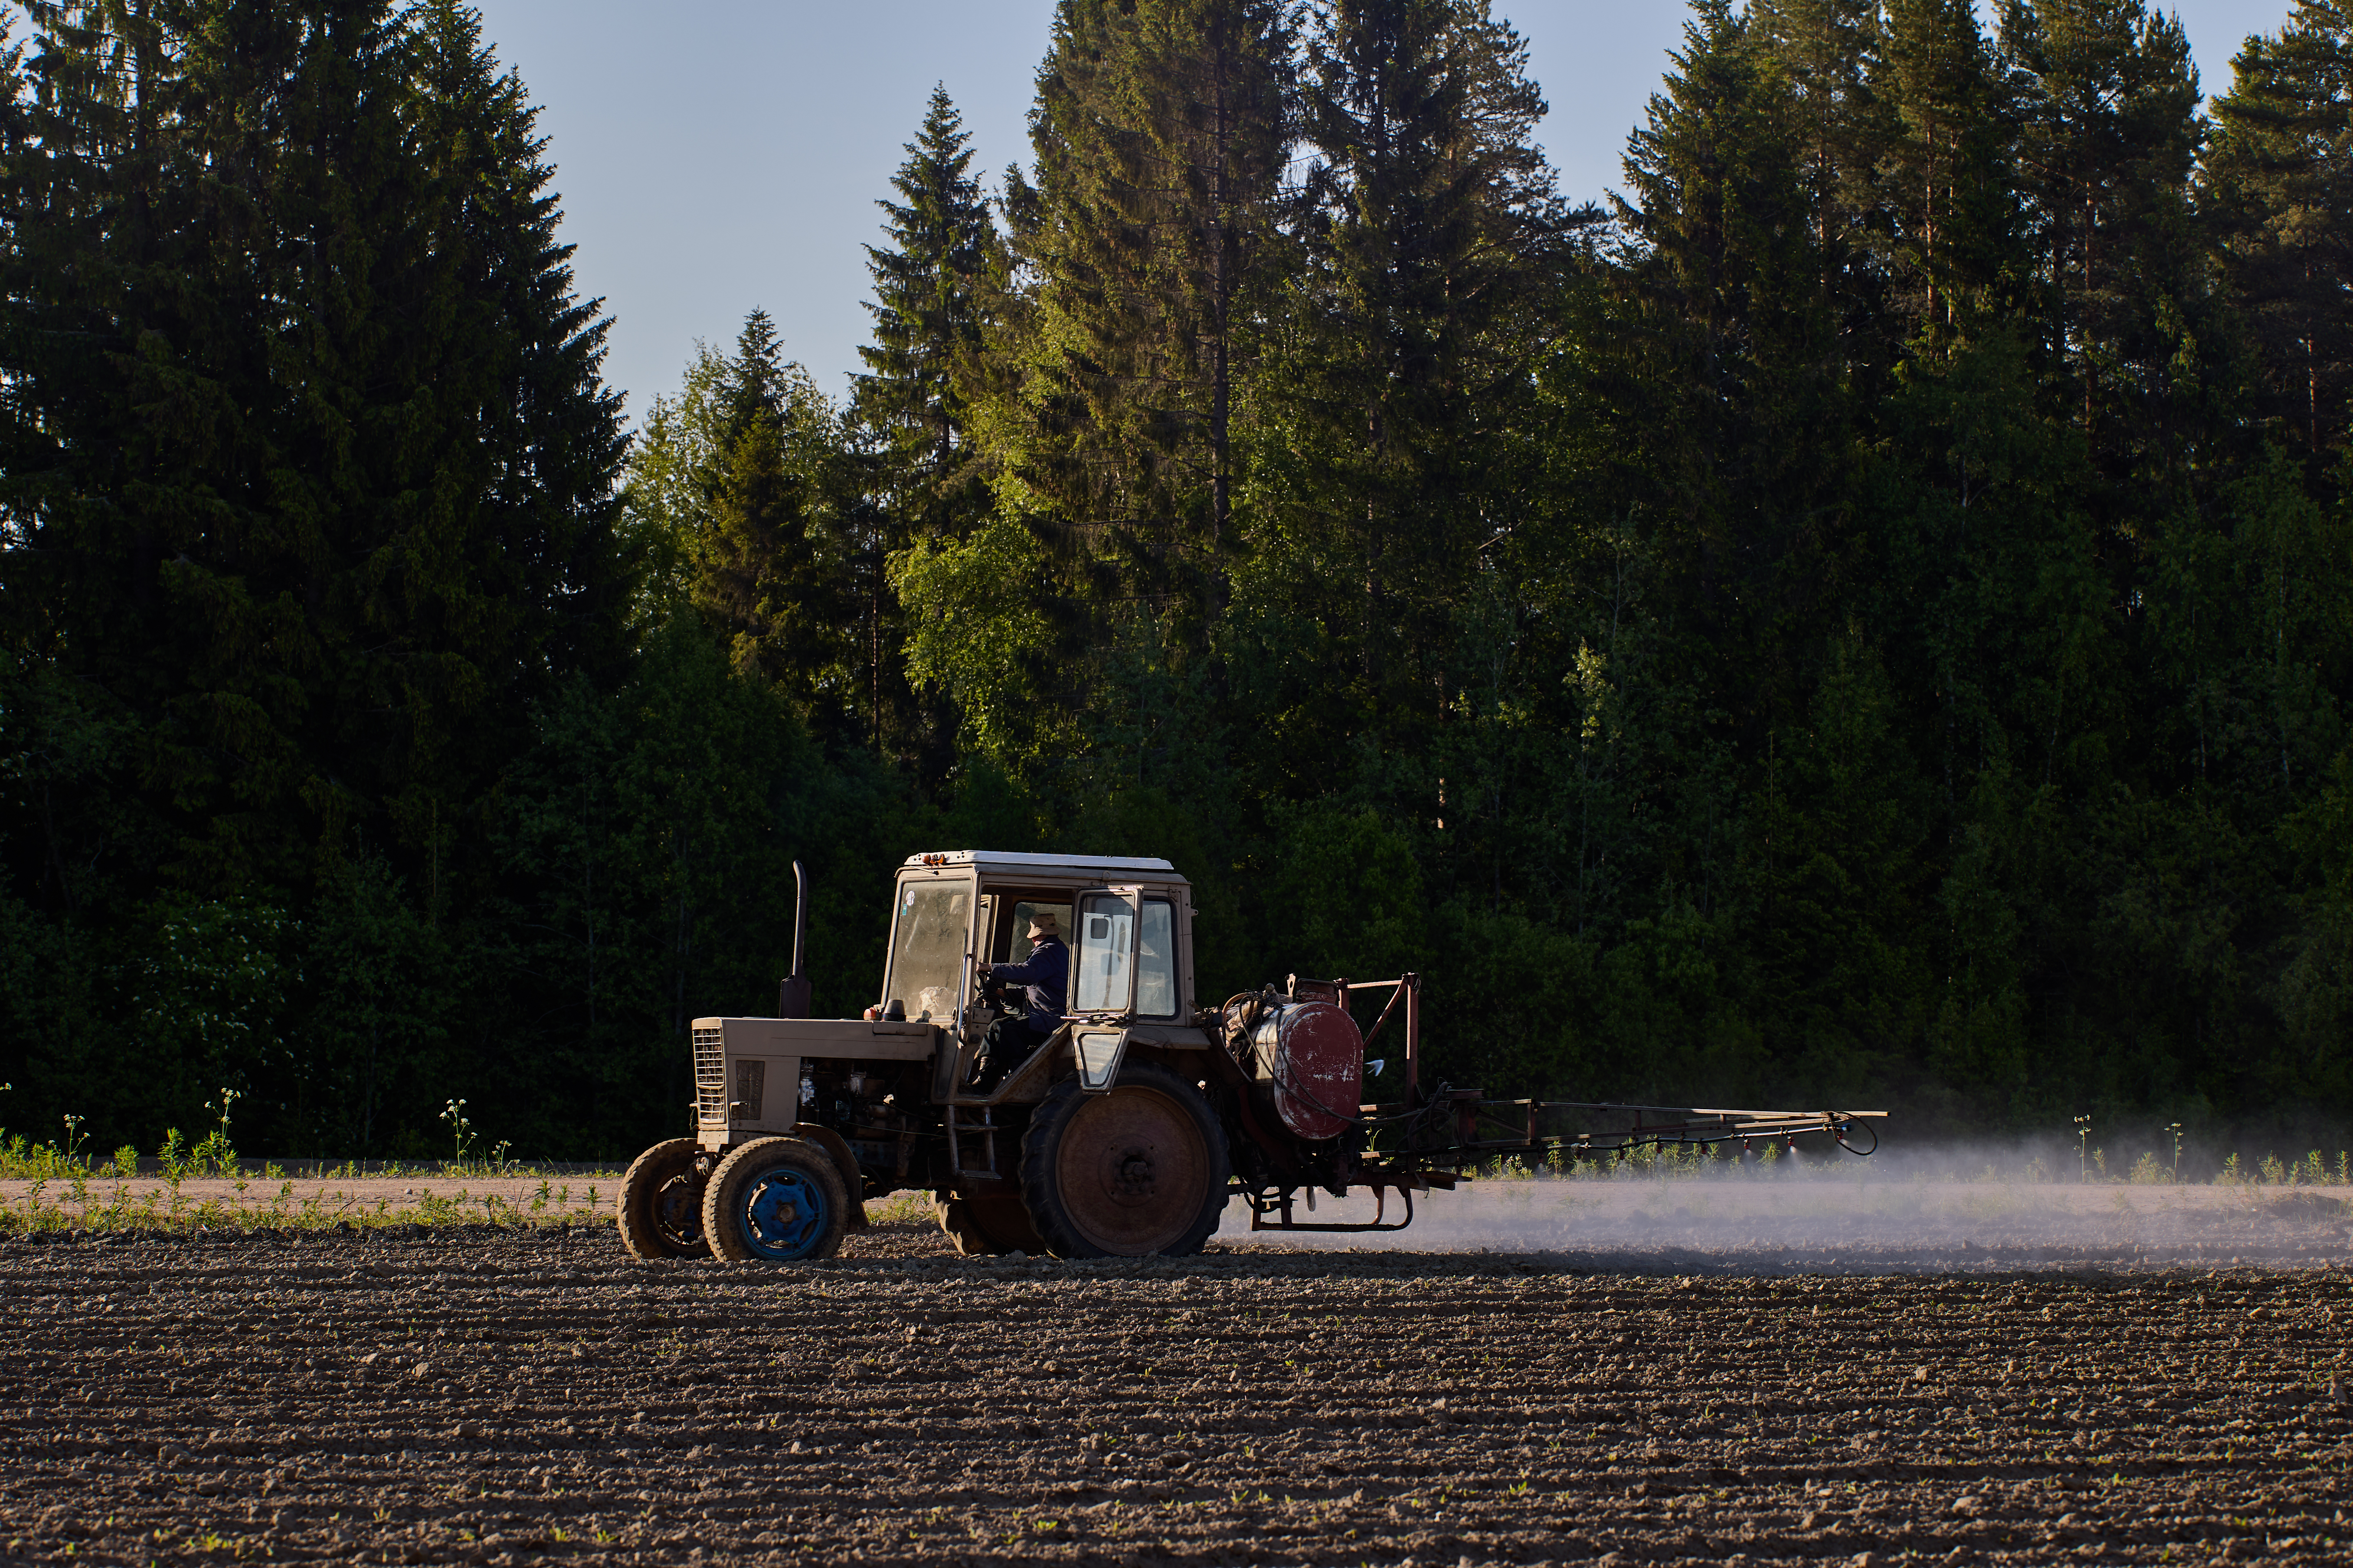 A tractor using a boom sprayer to apply herbicides to a potato field. | Source: Getty Images